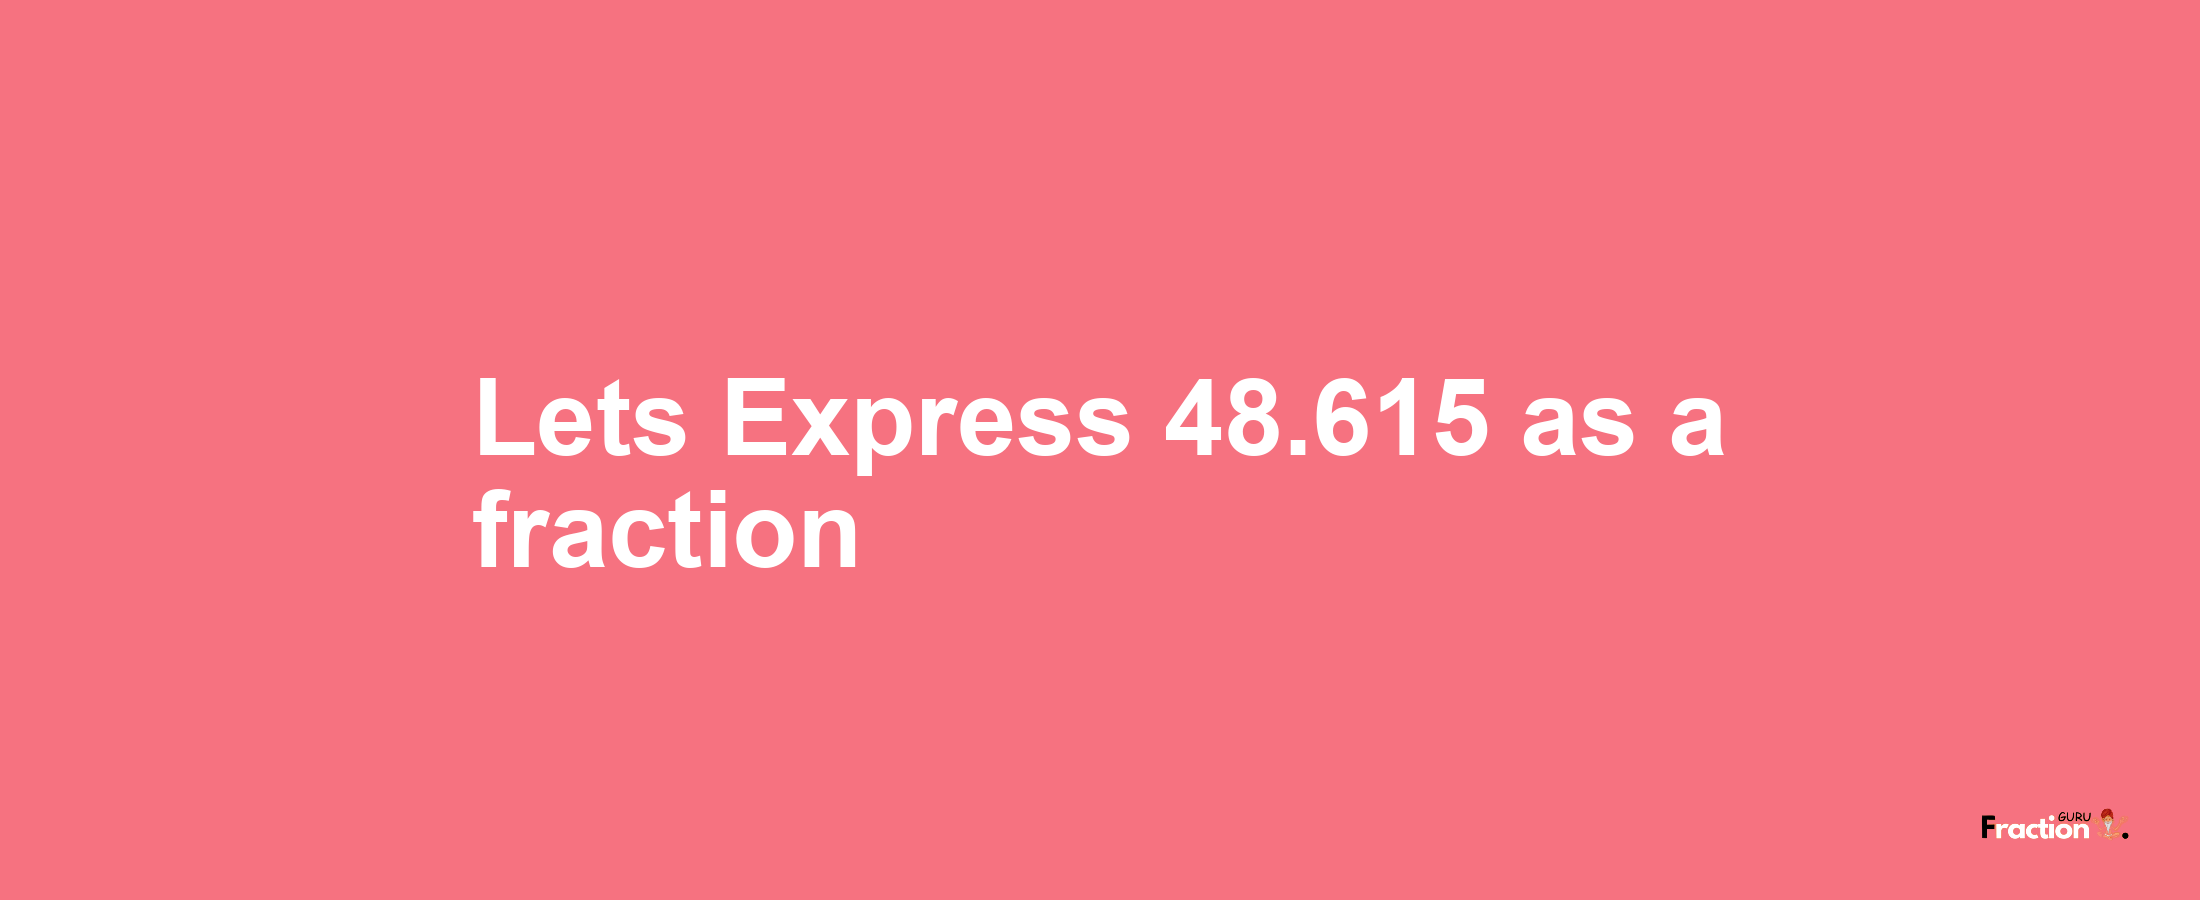 Lets Express 48.615 as afraction